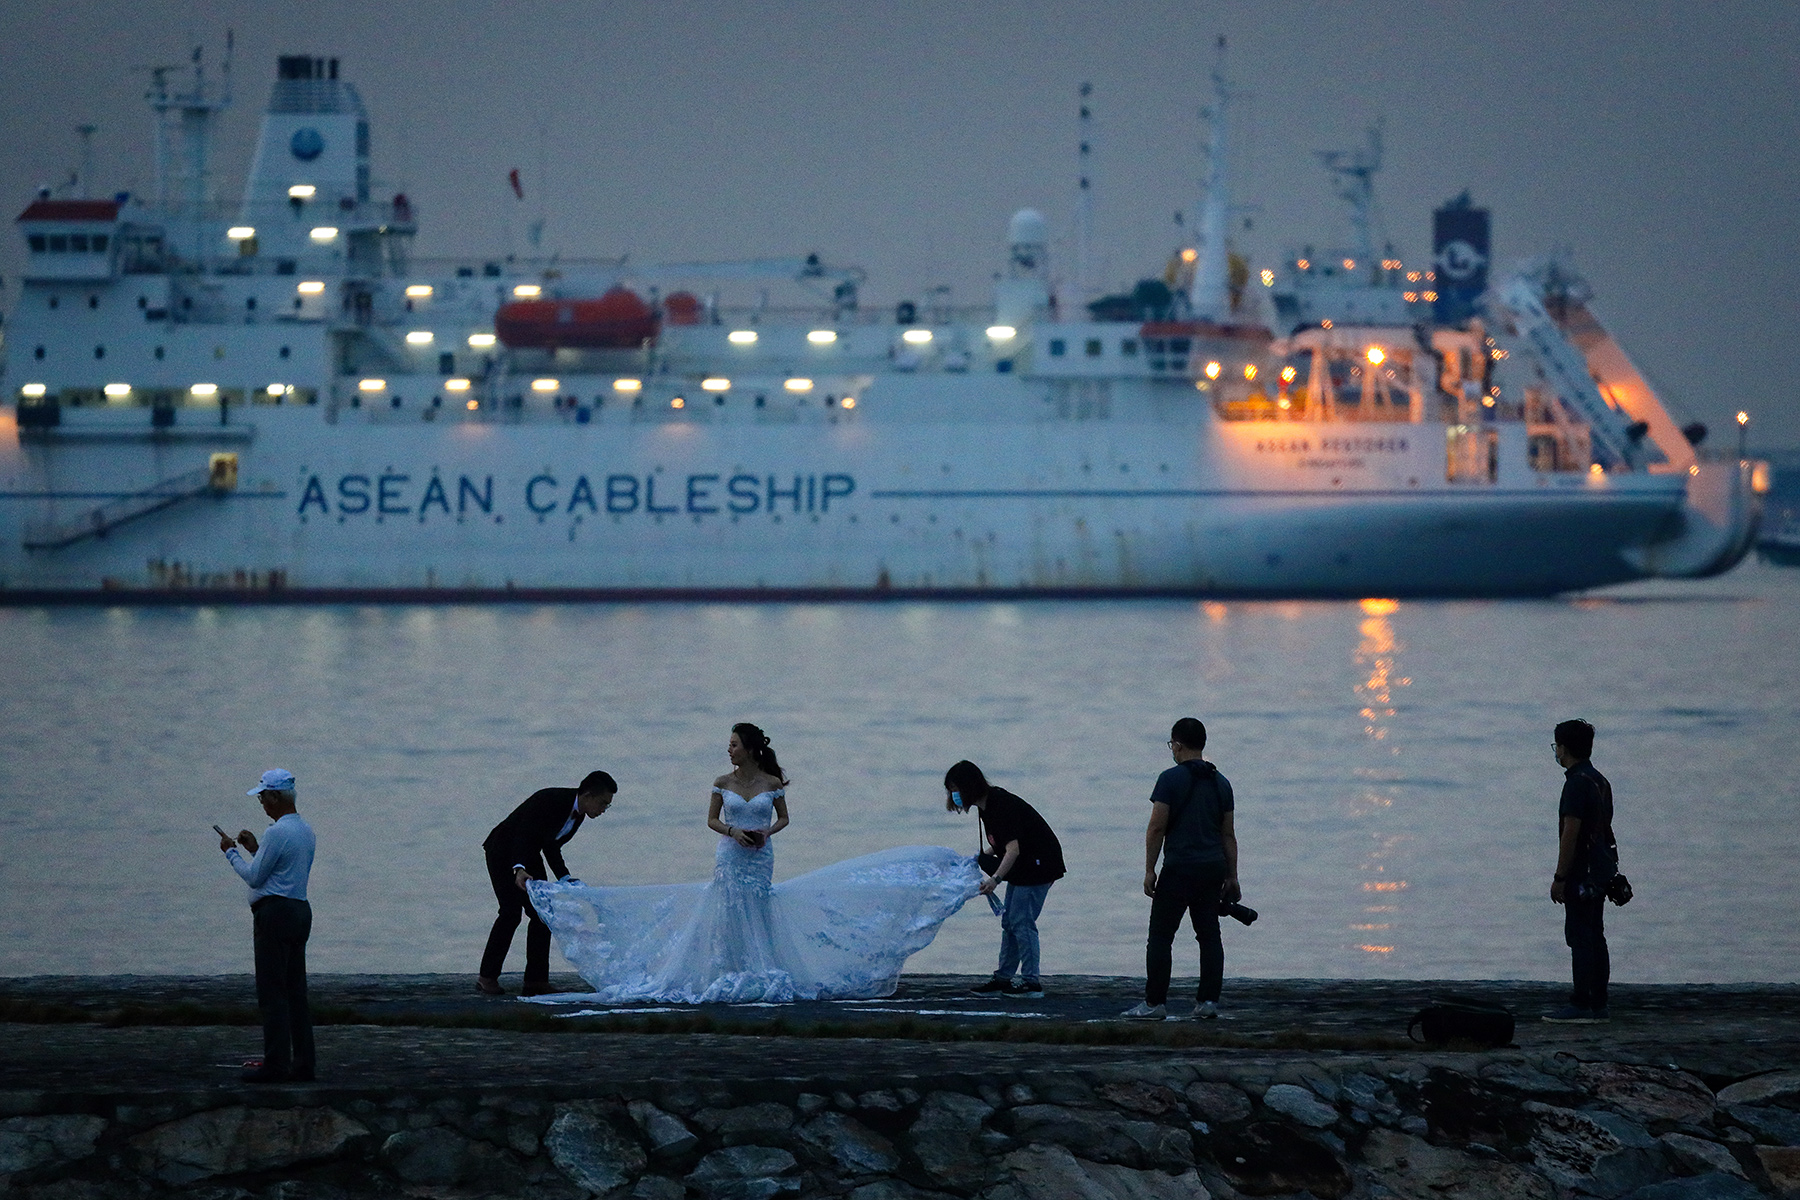 A couple prepare for a photoshoot in front of a ship in the water